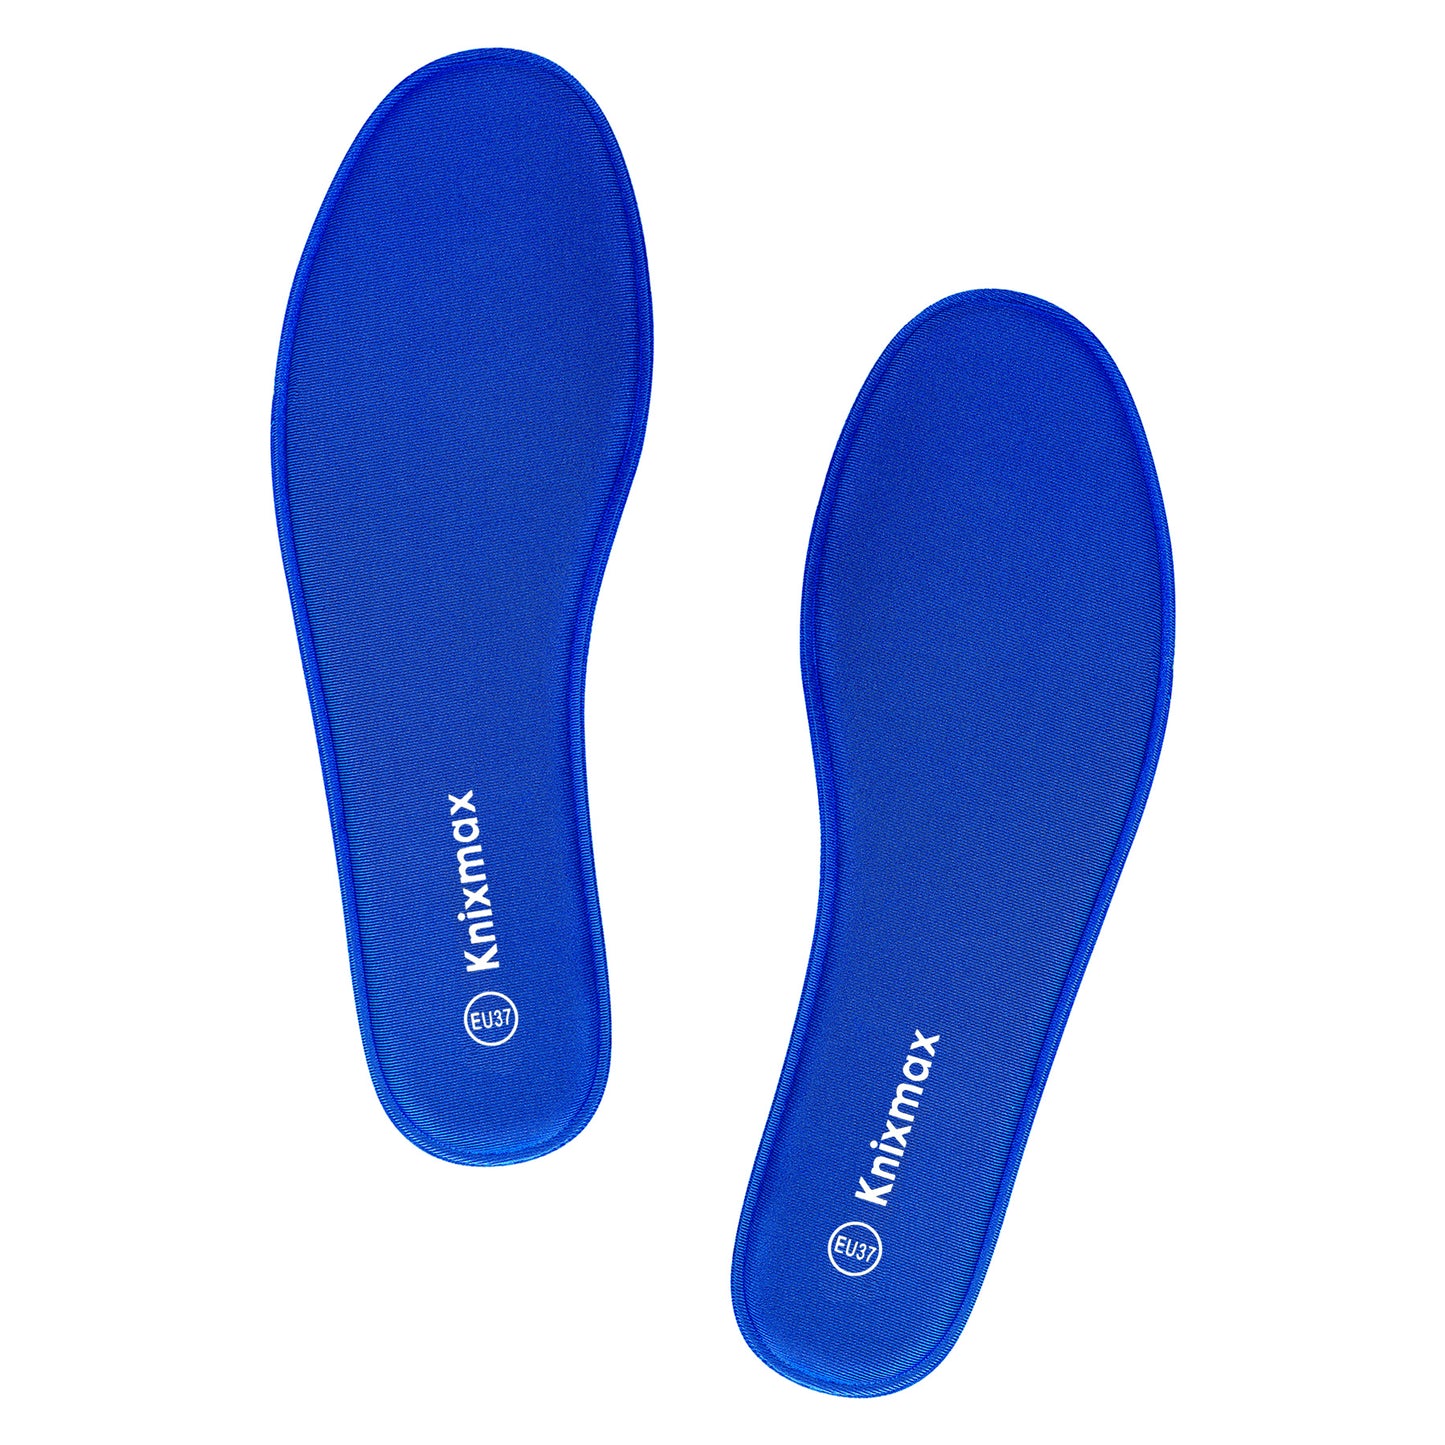 Knixmax Women's Memory Foam Insoles, Navy, for Athletic Shoes & Sneakers